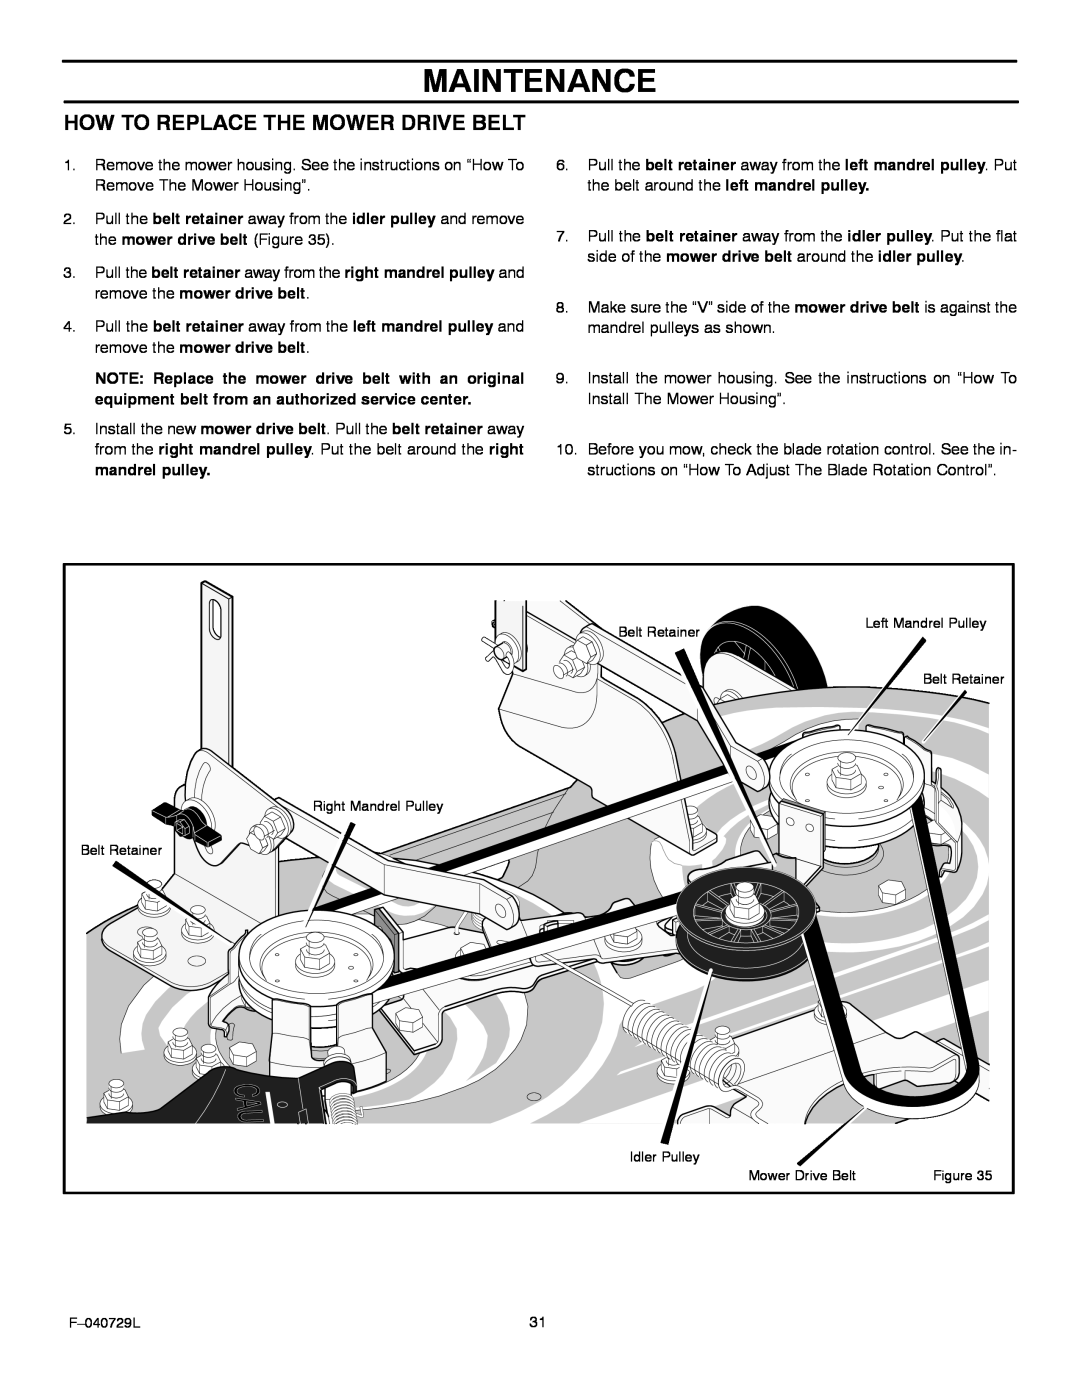 Murray 425620x92A manual Maintenance, How To Replace The Mower Drive Belt 